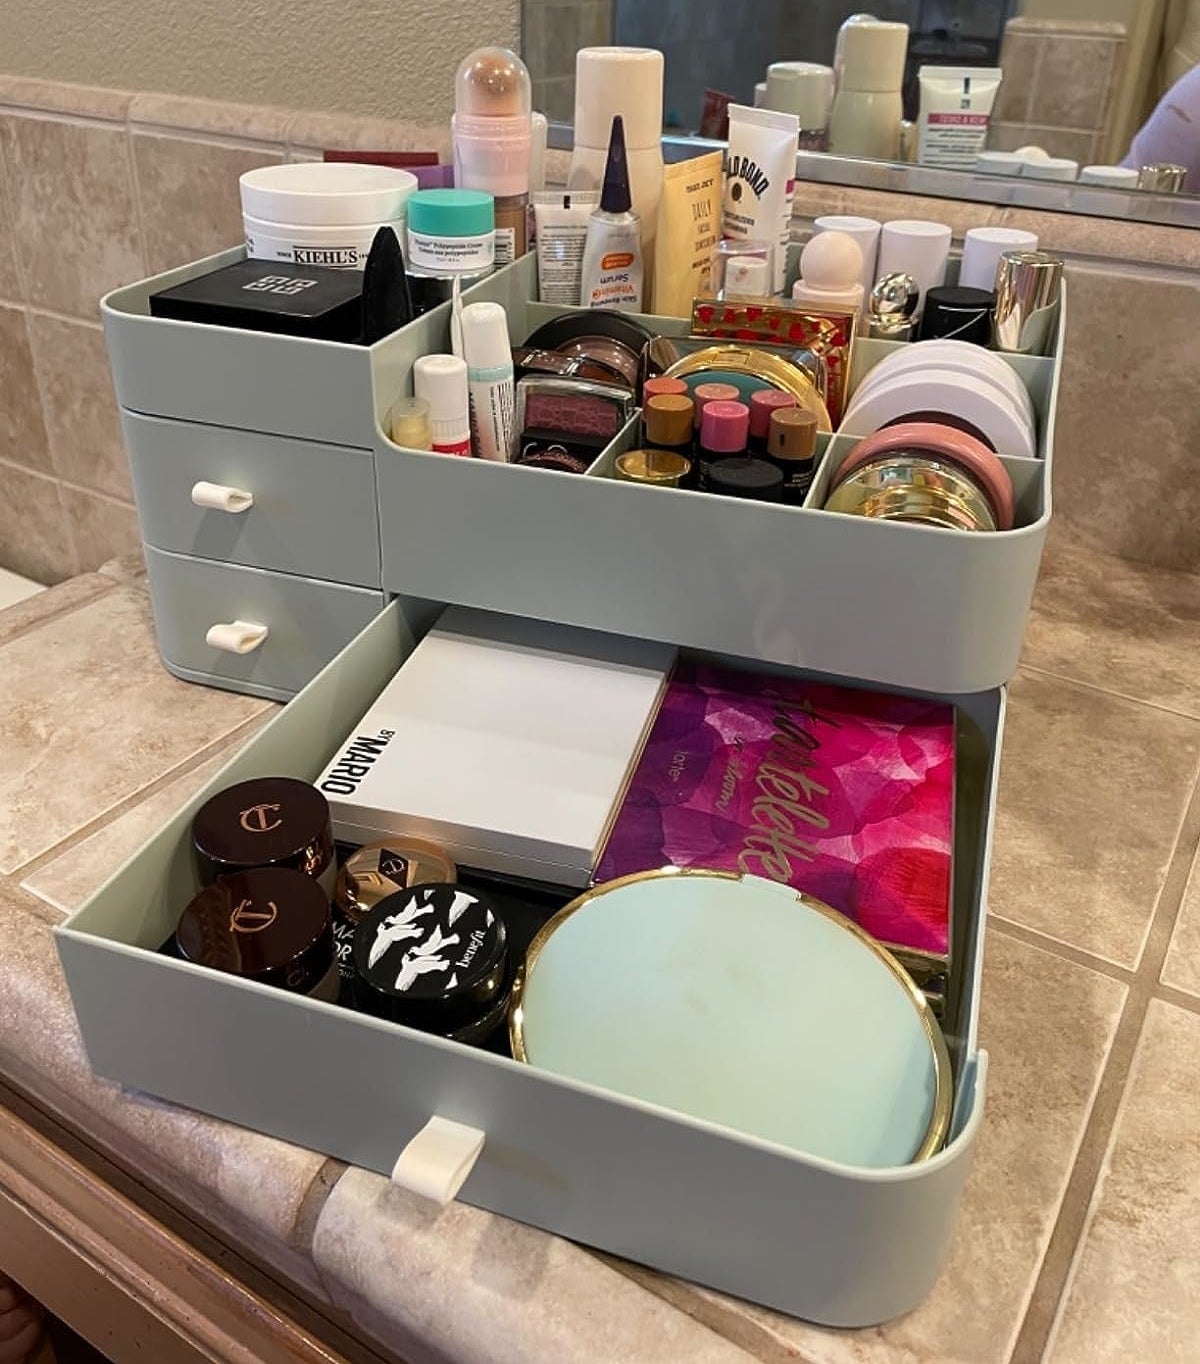 Reviewer image of the organizer filled with makeup on their vanity